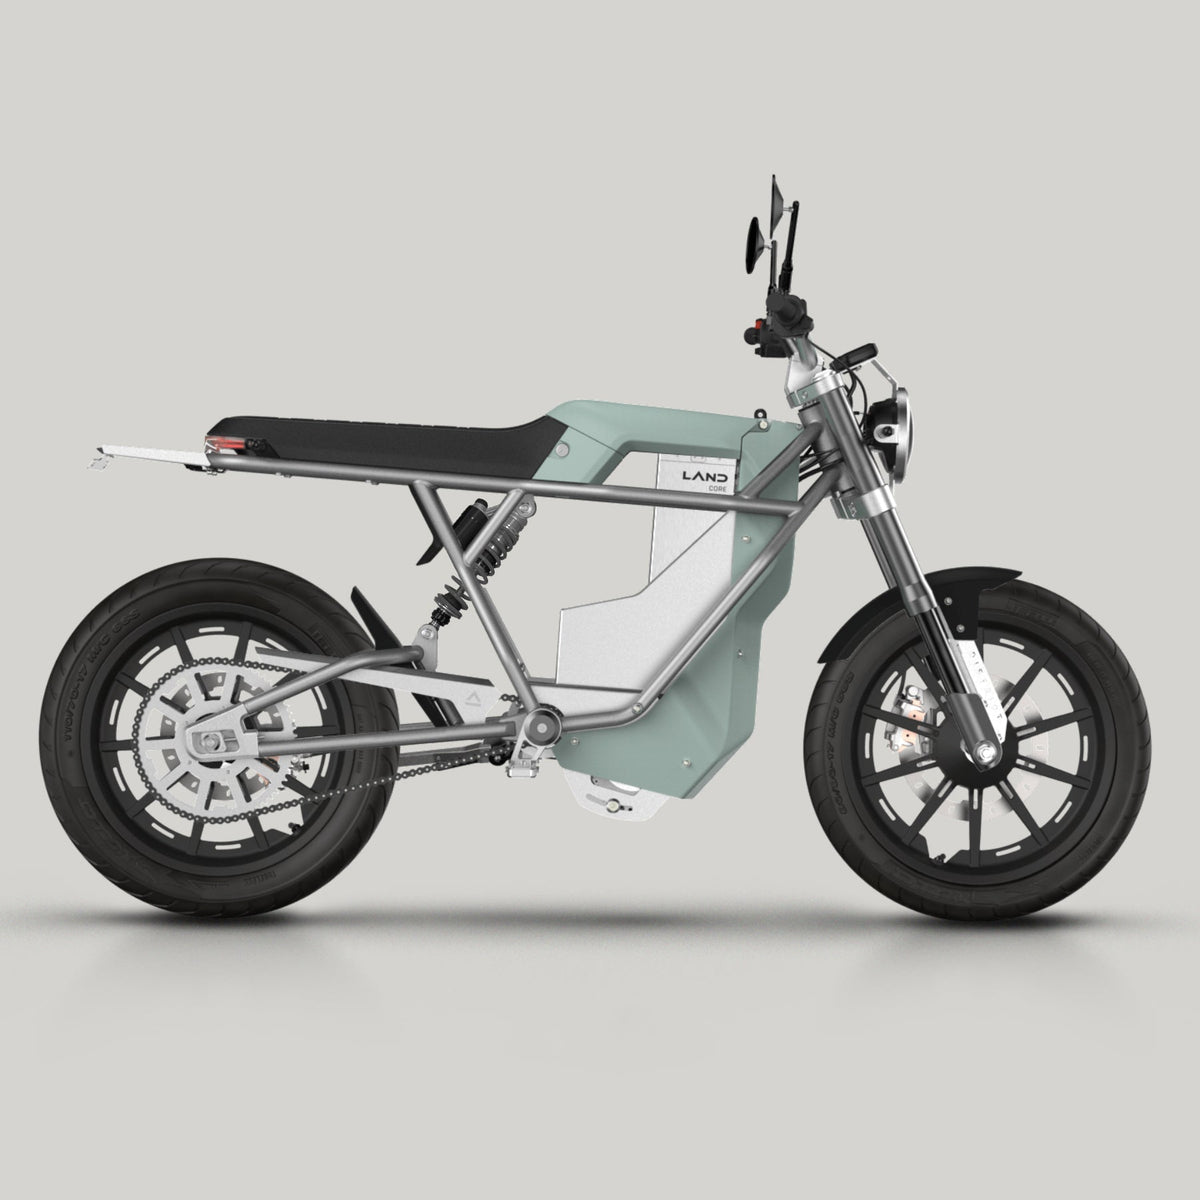 District Street Electric Motorcycle - Land Energy